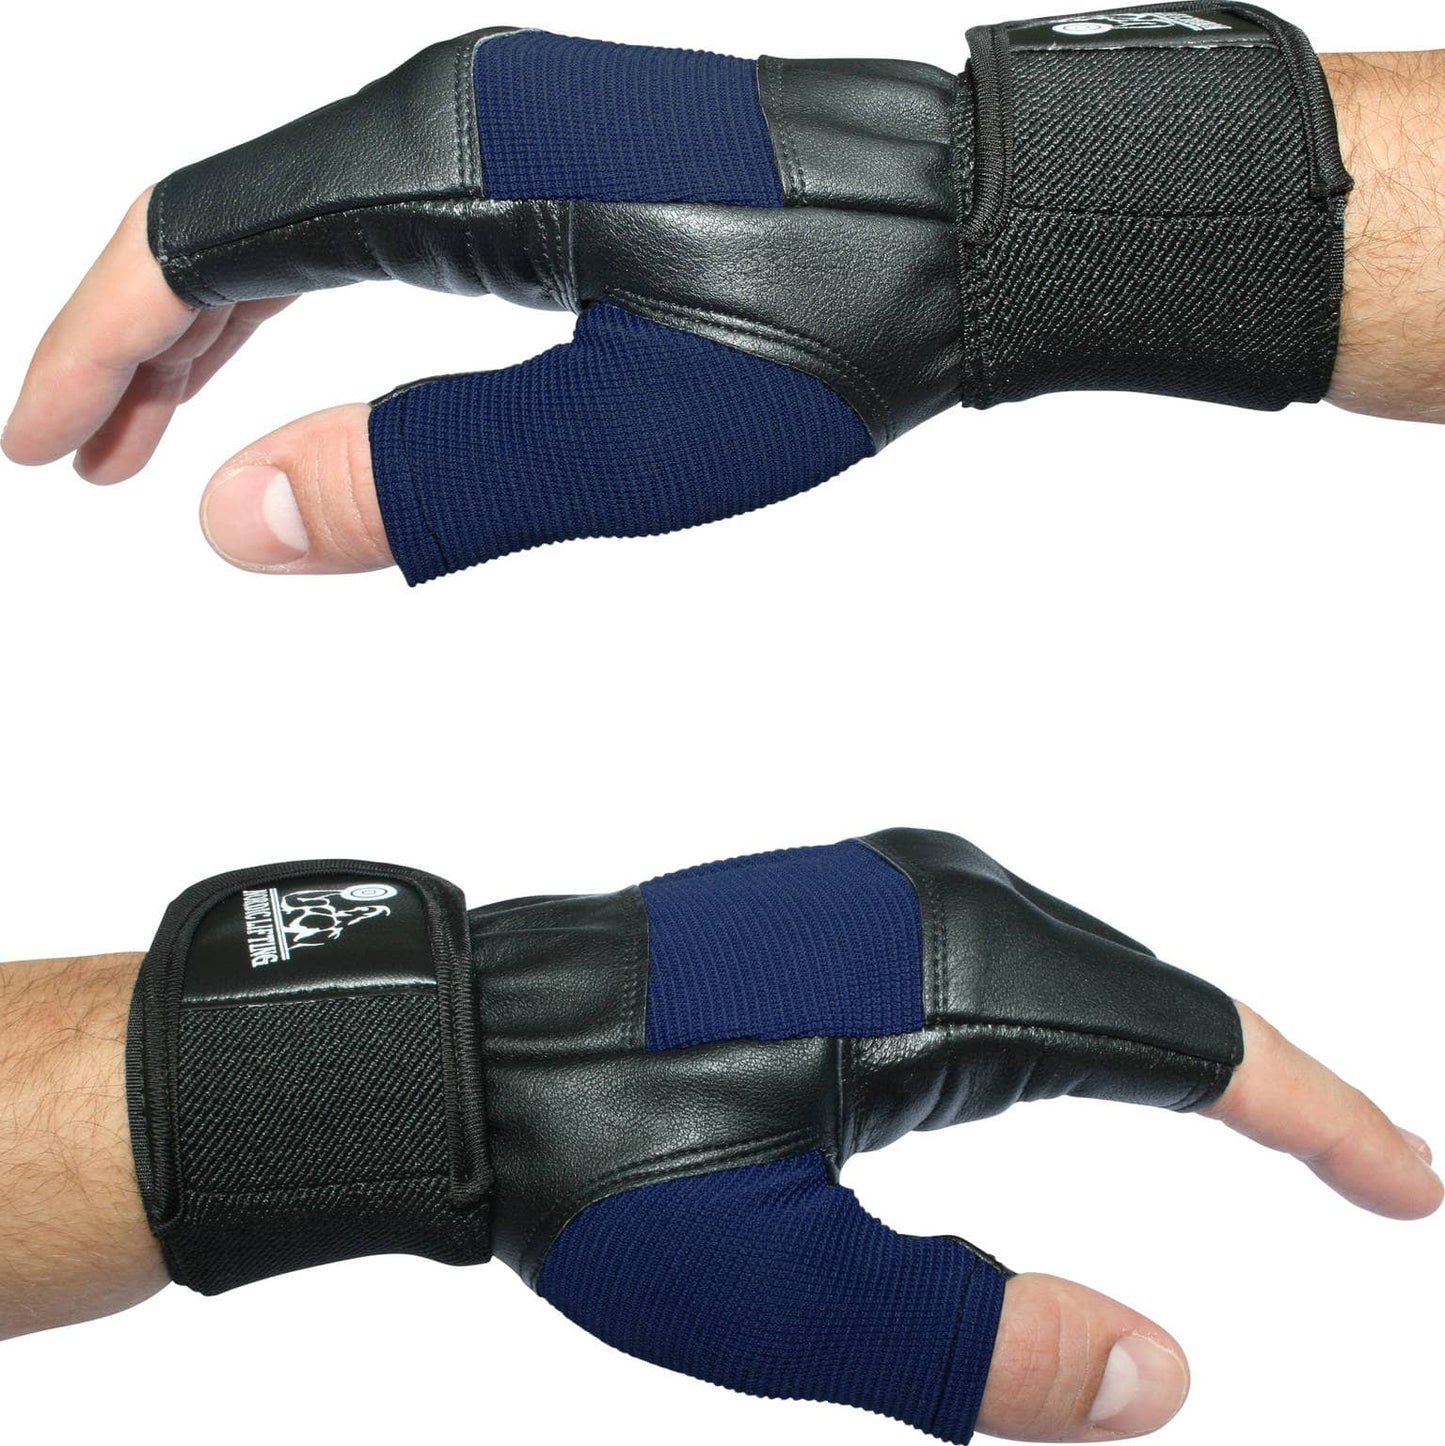 Weightlifting Gloves with 12" Wrist Support